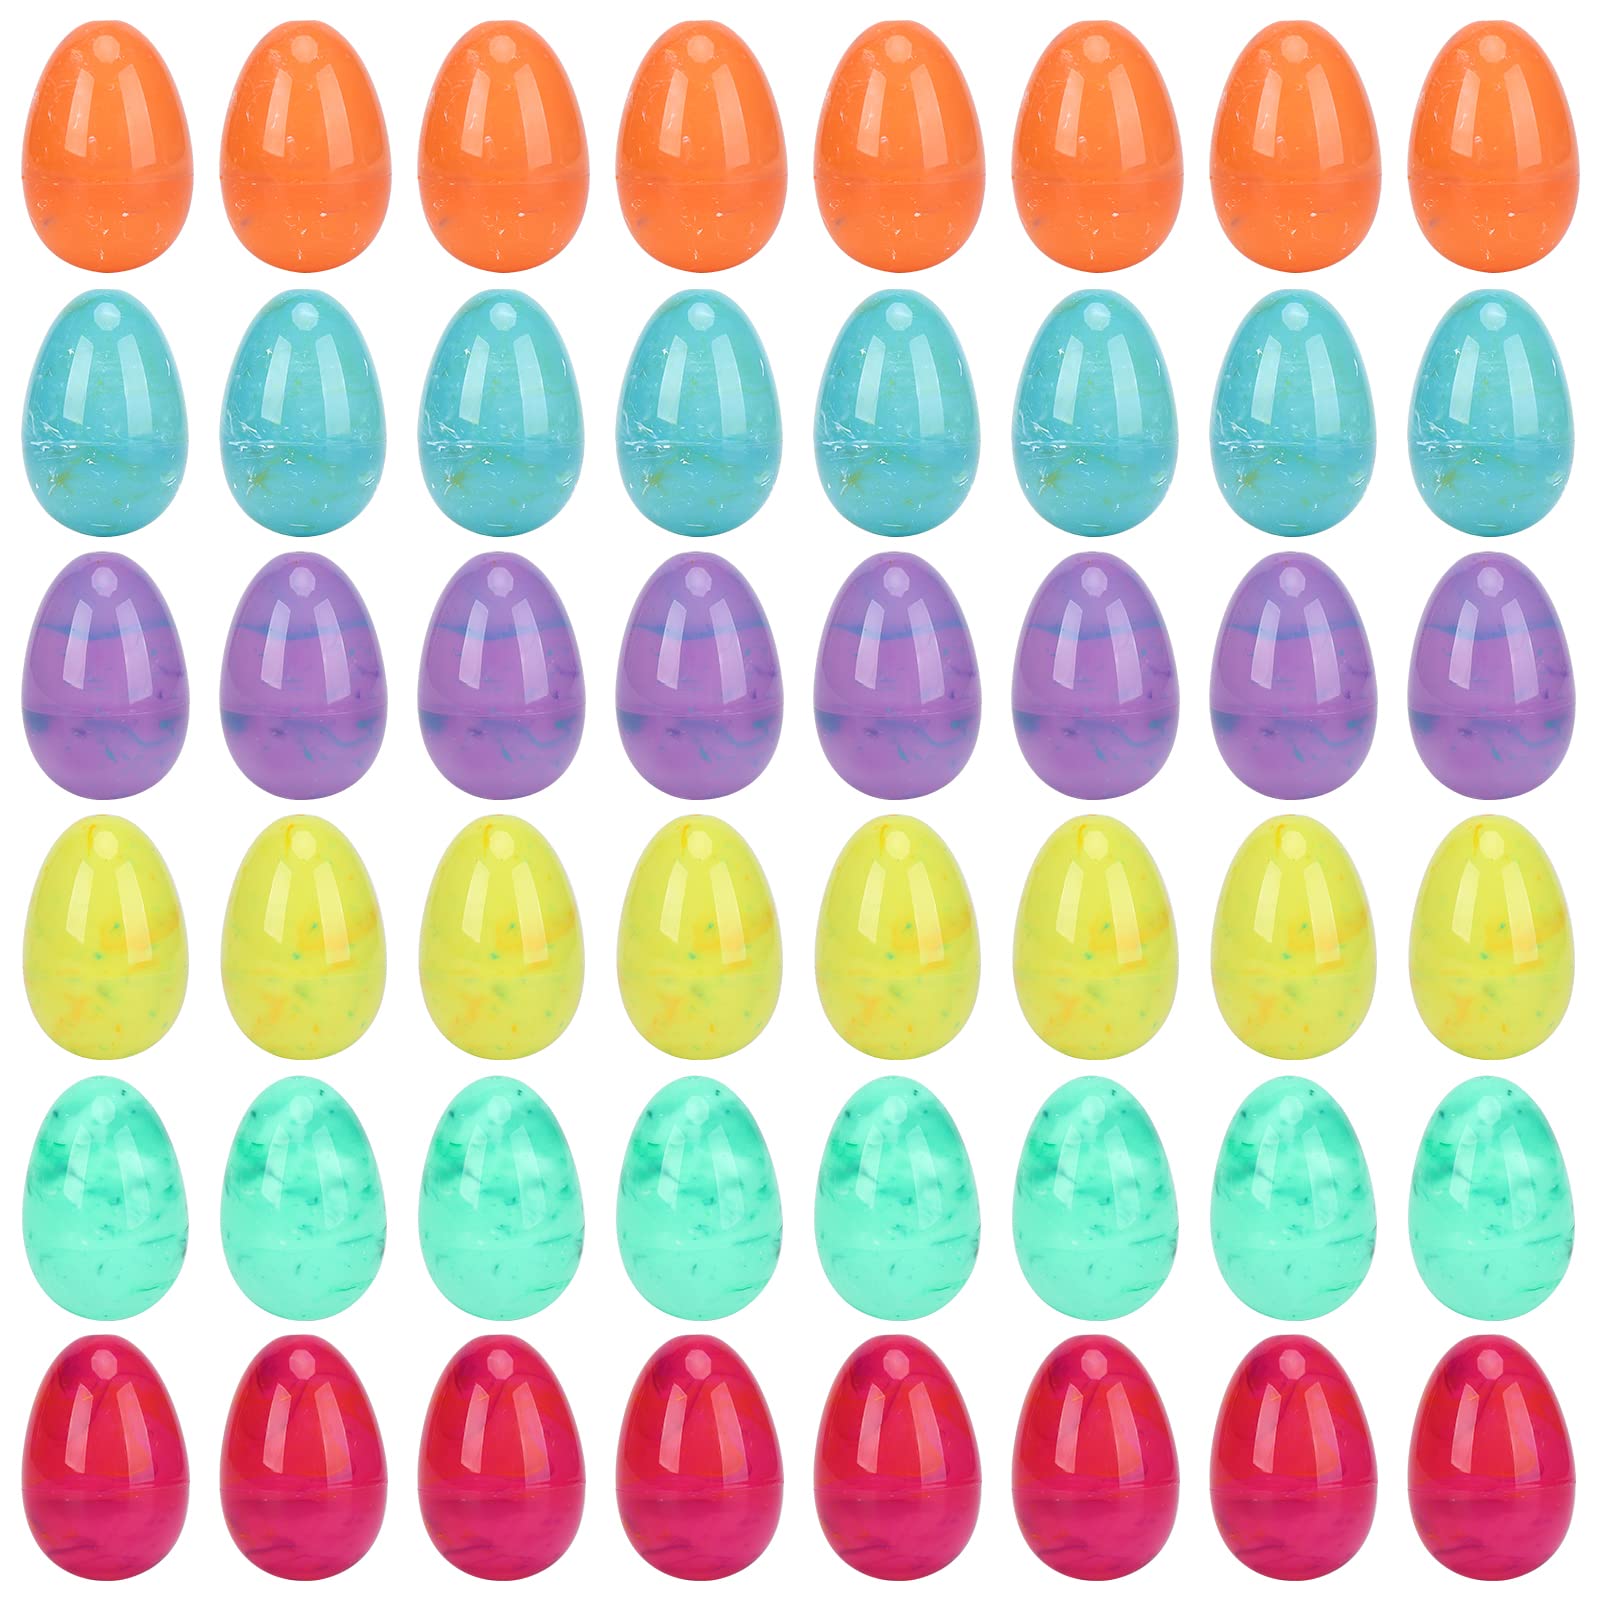 48pcs Easter Printed Plastic Marble Eggs Basket Stuffer for Easter Egg Hunt Event, Party Favor Goodie Bags, Scene and Decoration, School Party Favor Packs and Classroom Rewards (Marbled Eggs)